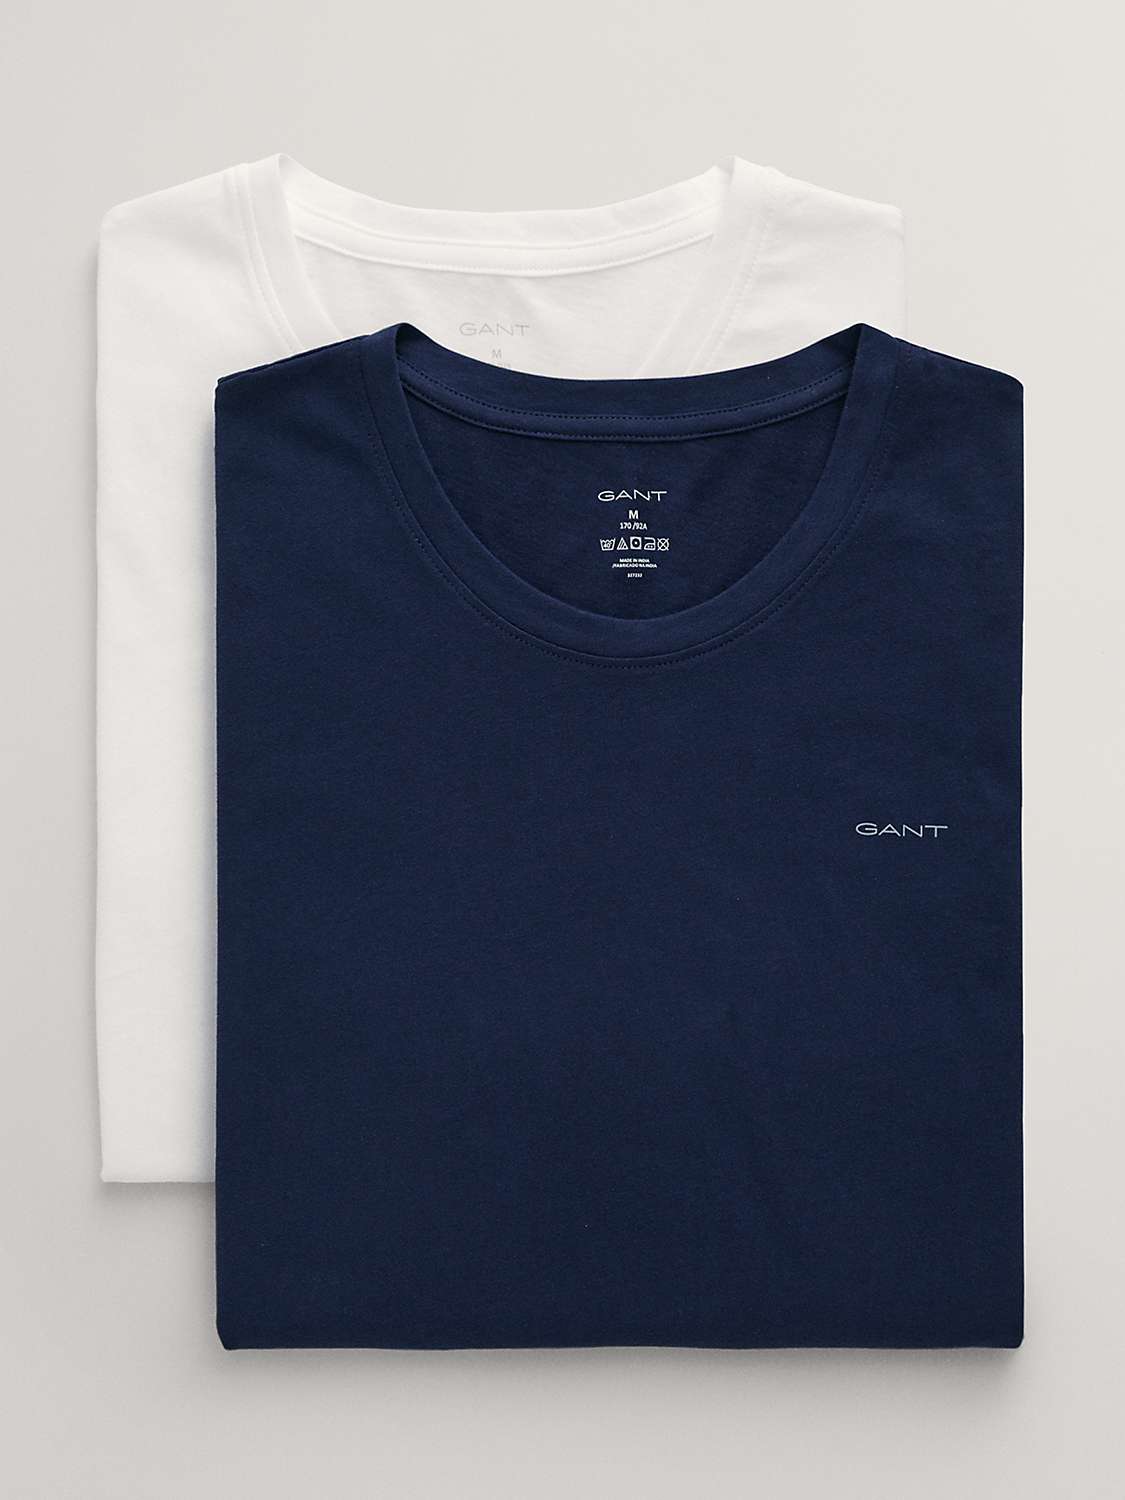 Buy GANT Casual Soft Cotton T-Shirt, Pack of 2 Online at johnlewis.com